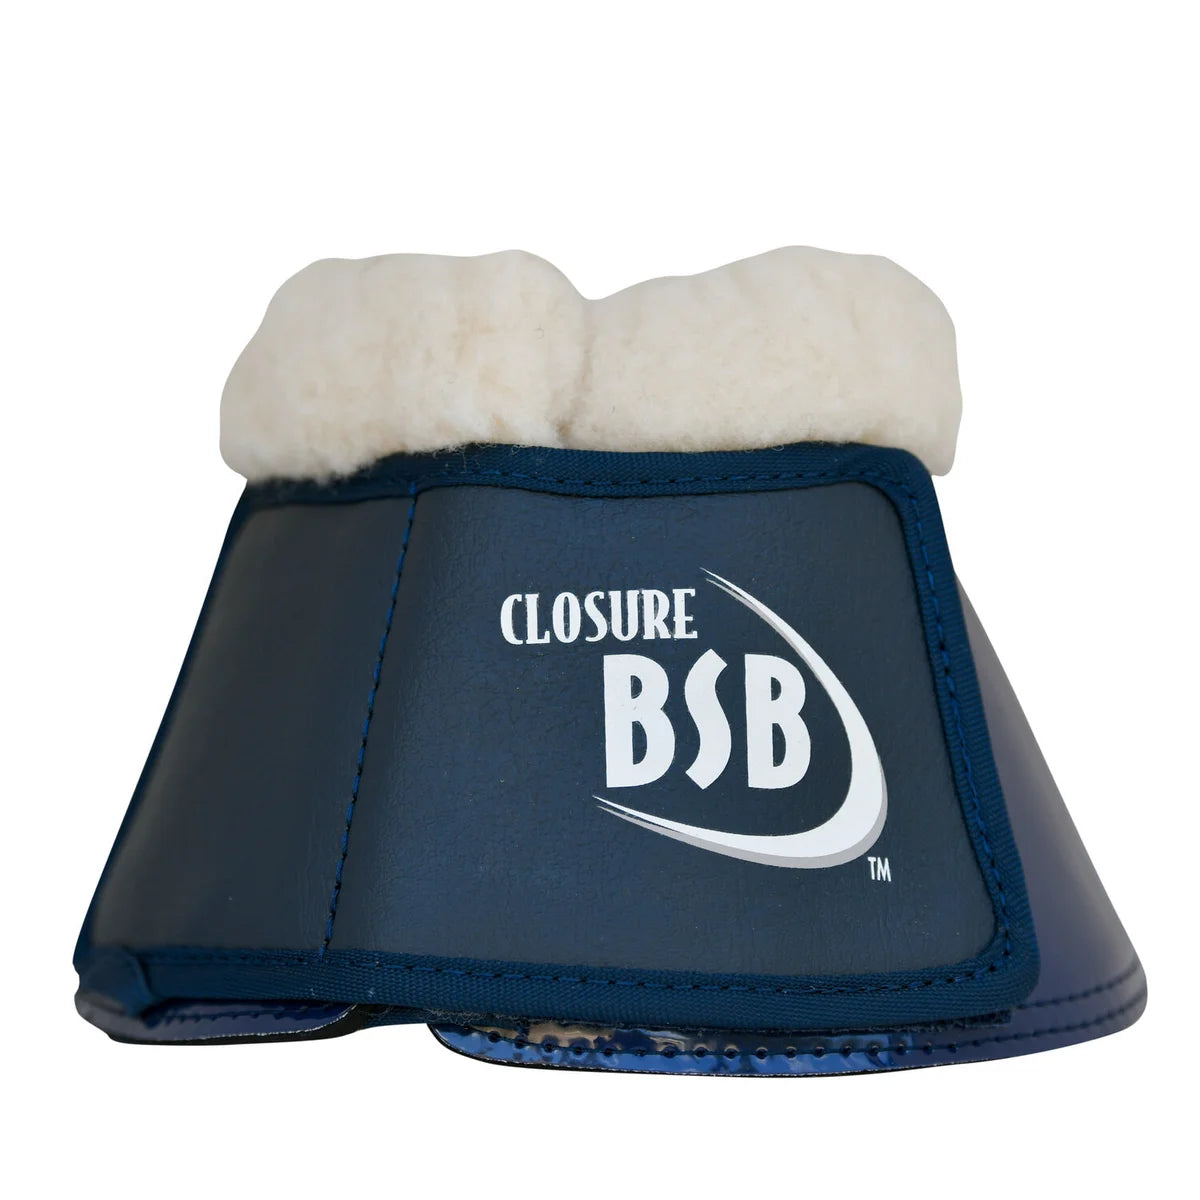 BSB Closure Bell Boot with Fleece Top - Glossy